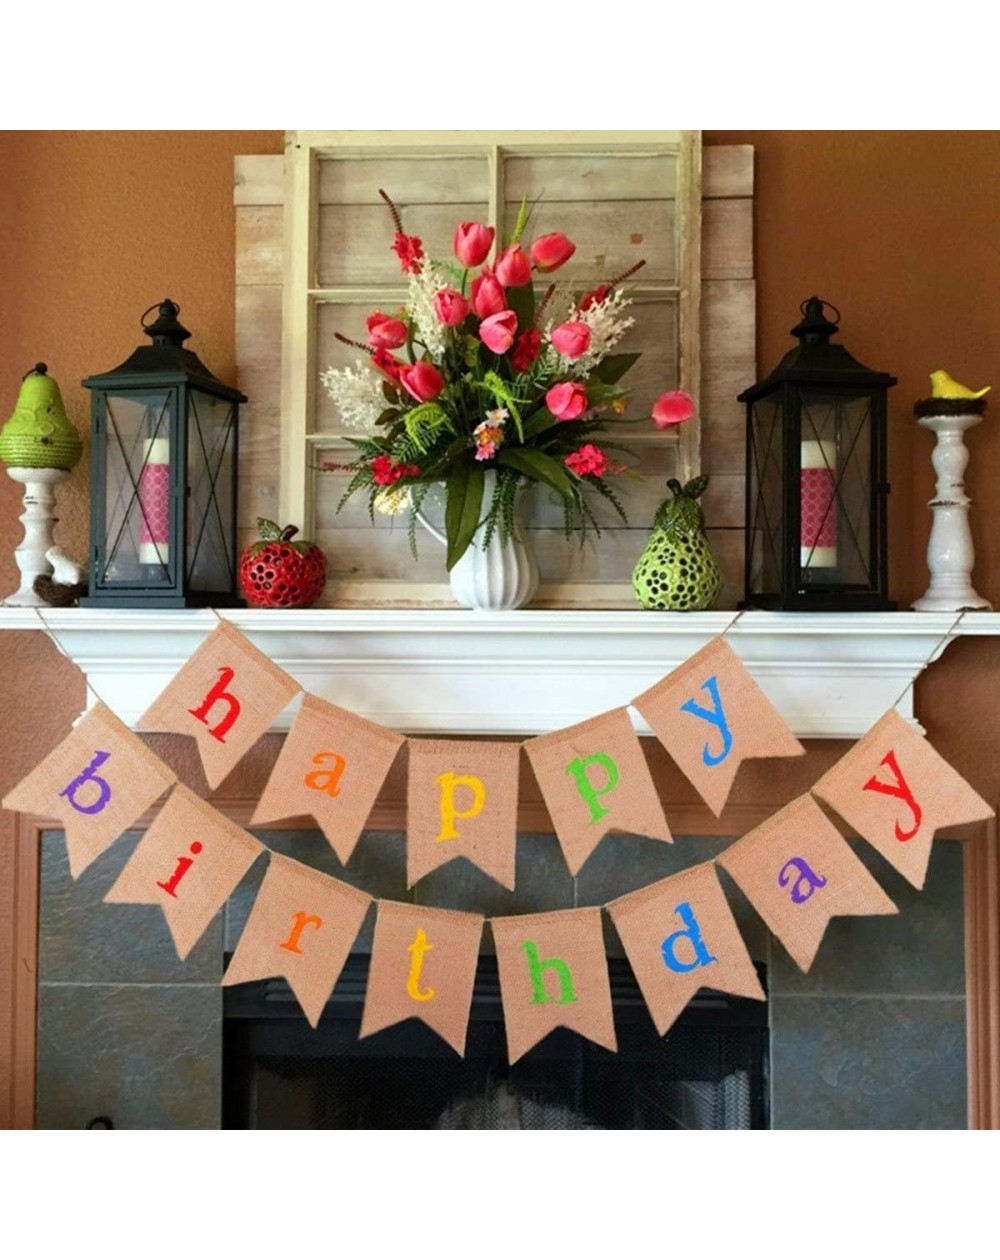 Banners Burlap Happy Birthday Banner- Colorful Happy Birthday Banner for Birthday Party Decorations VAG041S - CJ18D205XS2 $7.52